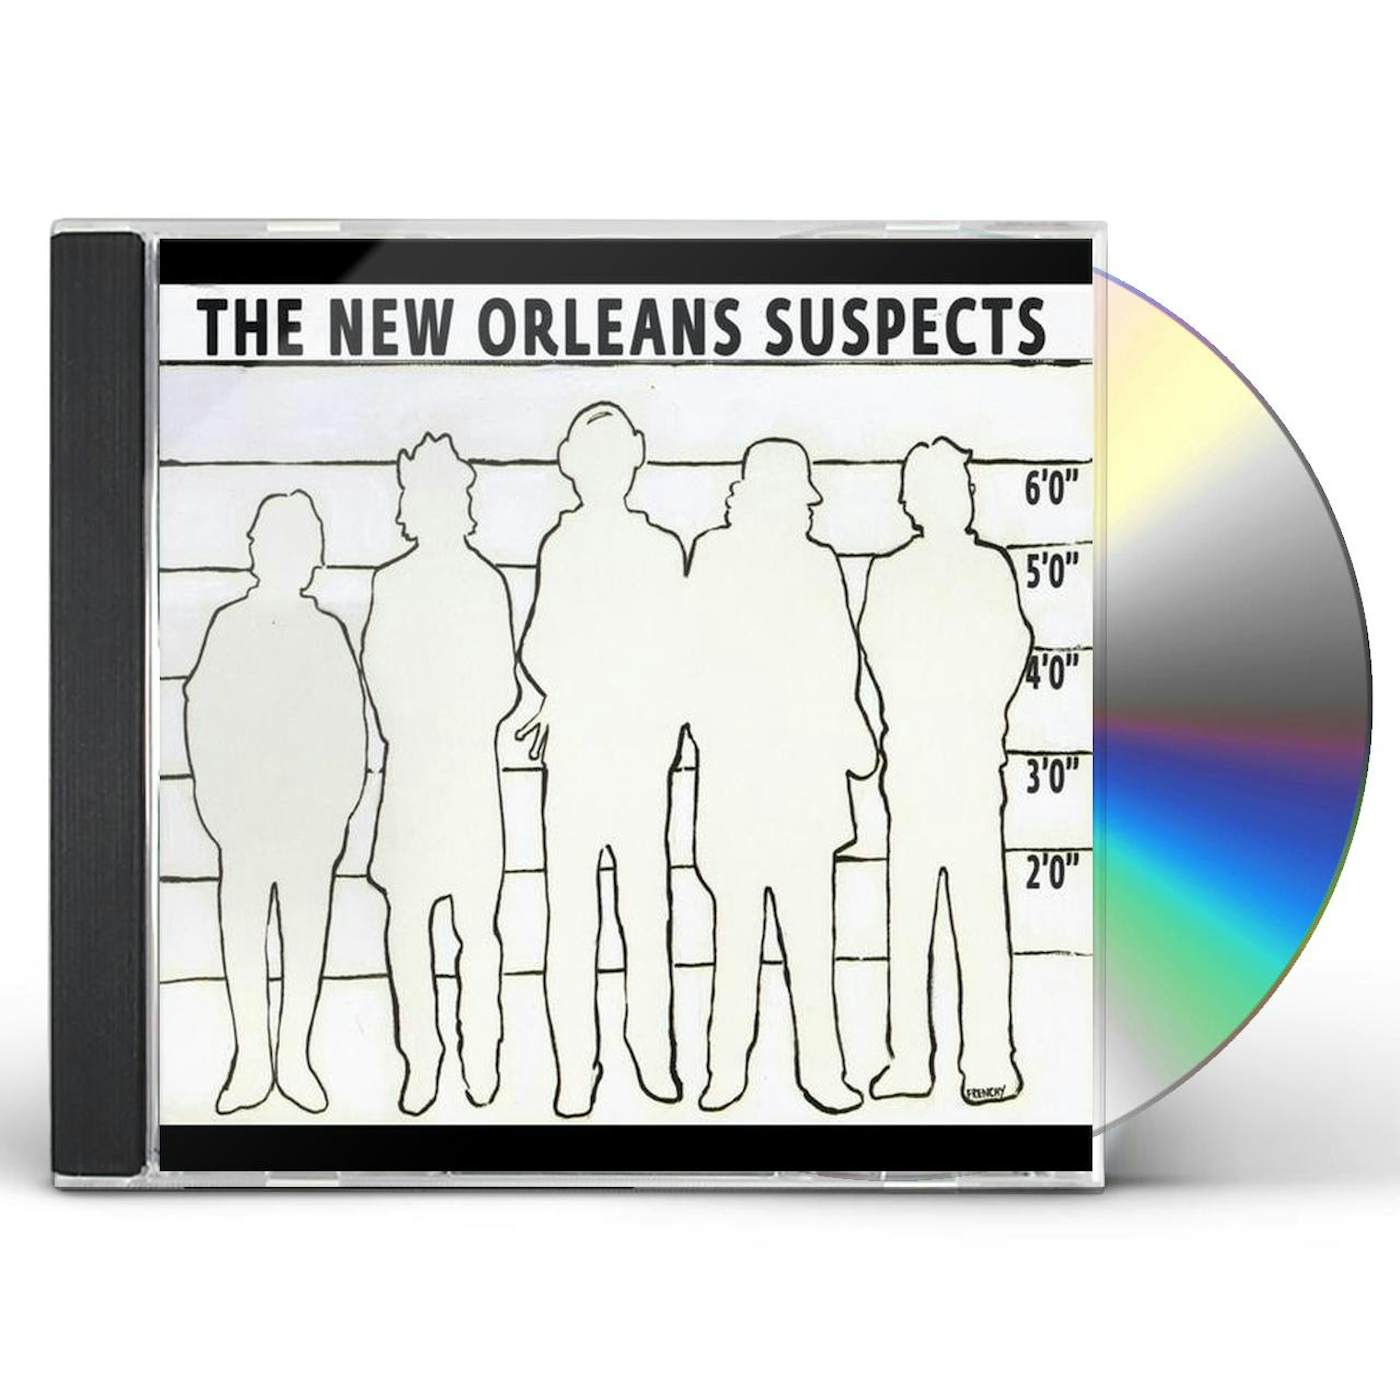 The New Orleans Suspects CD